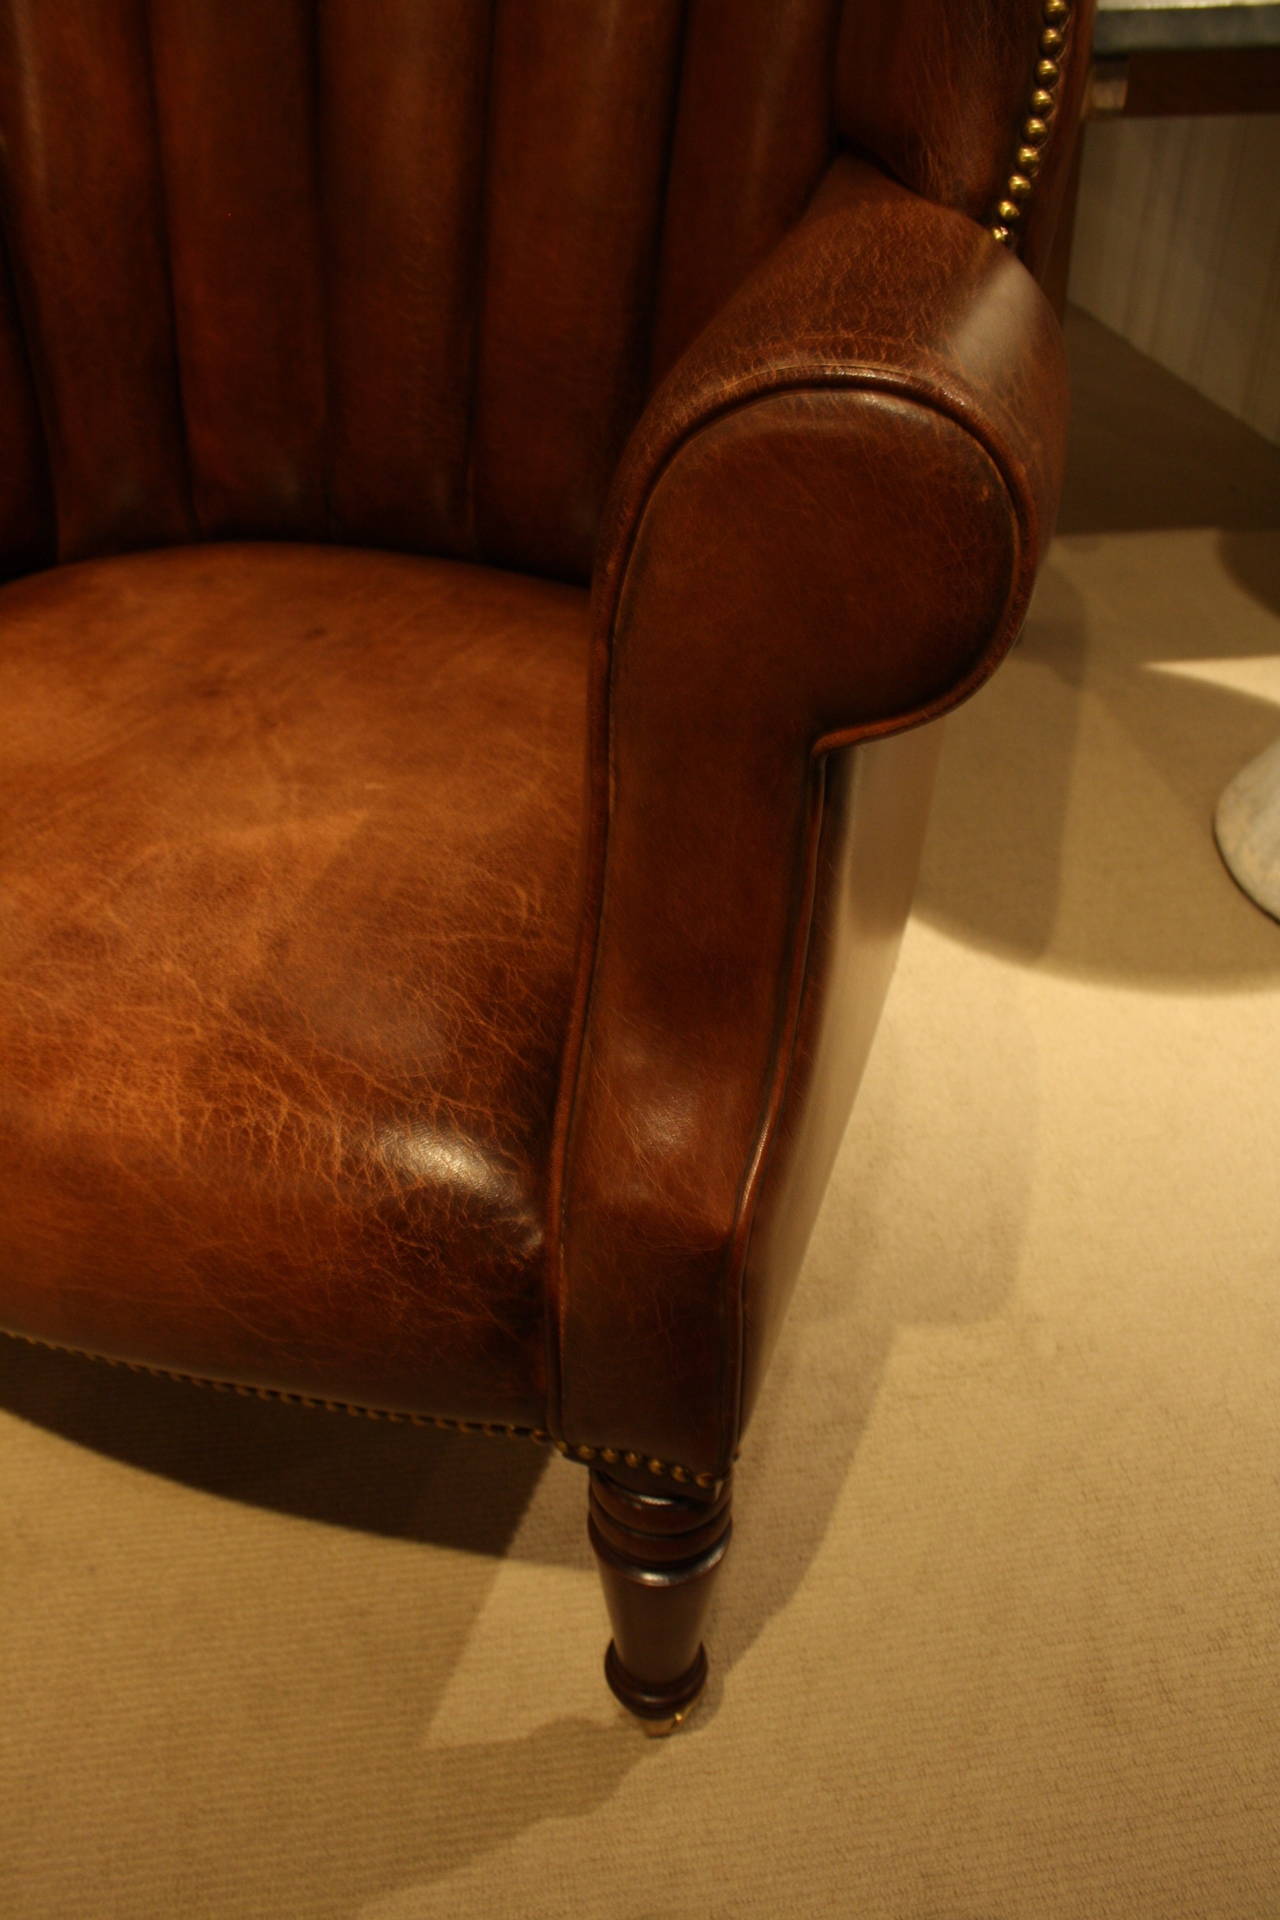 Selkirk Wing Chair in Dark Tan Leather In Excellent Condition For Sale In Atlanta, GA